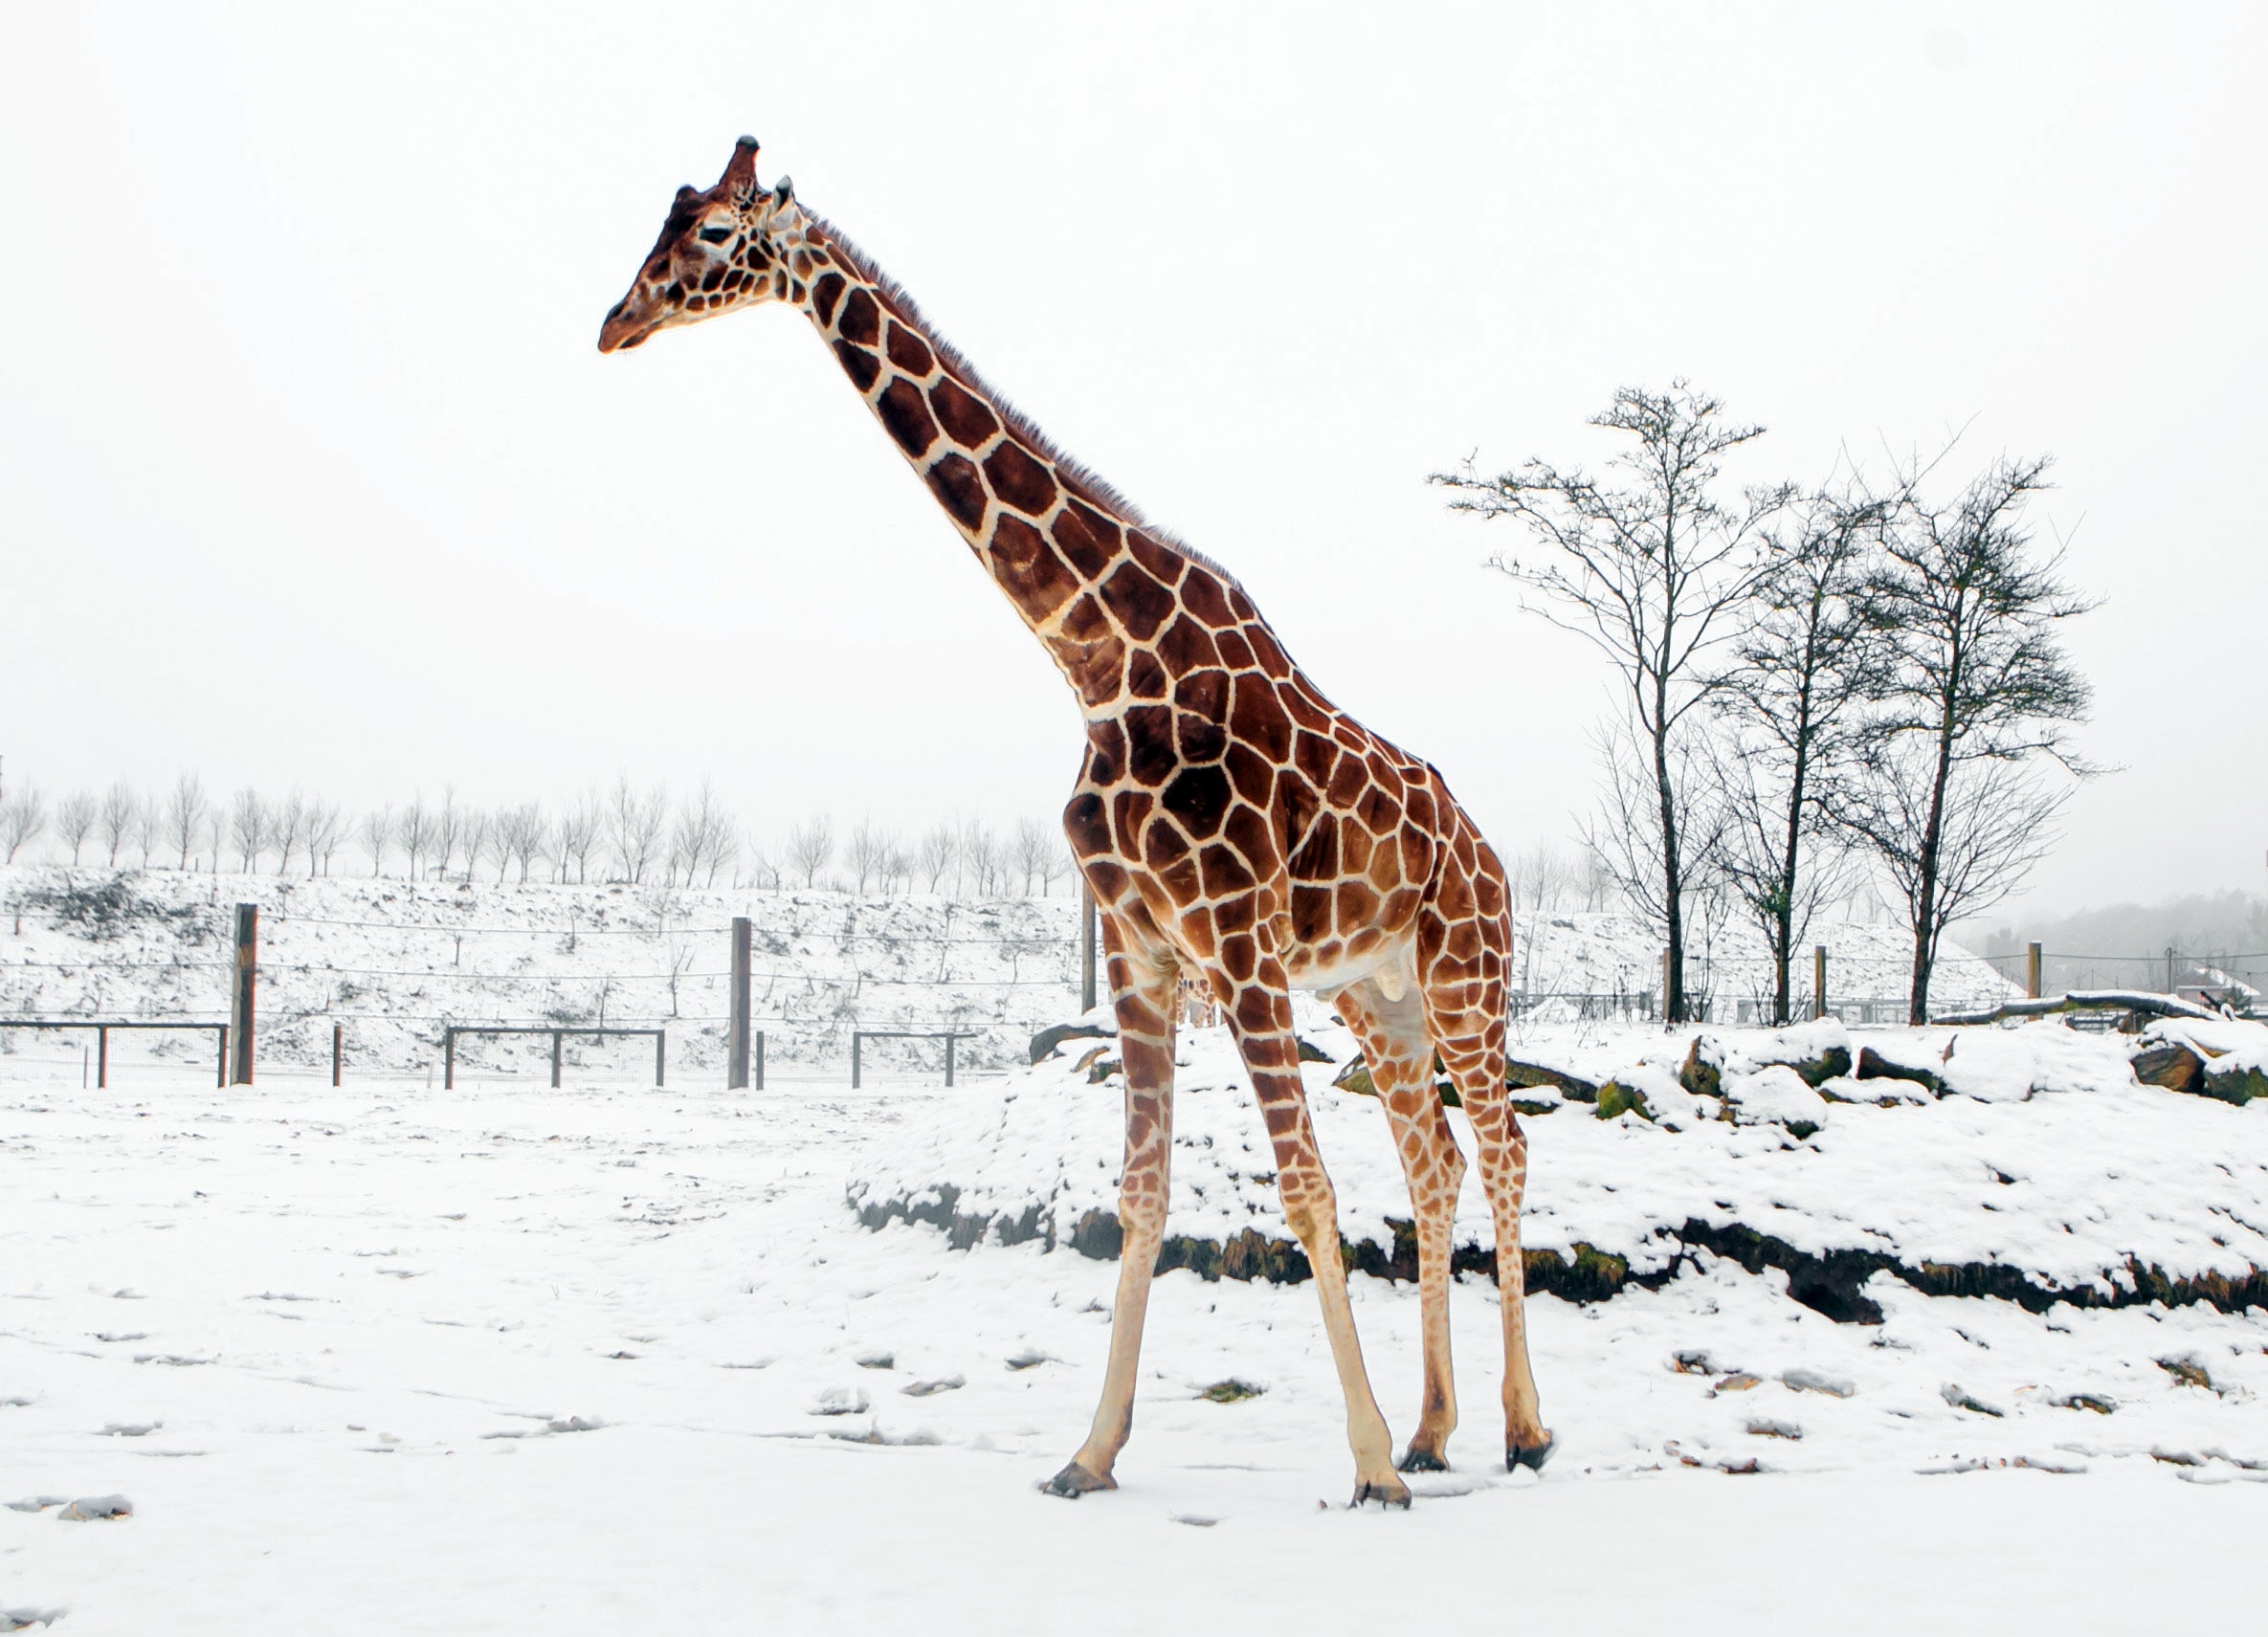 A giraffe makes a rare appearance in the snow at Yorkshire Wildlife Park in Doncaster, England on Tuesday